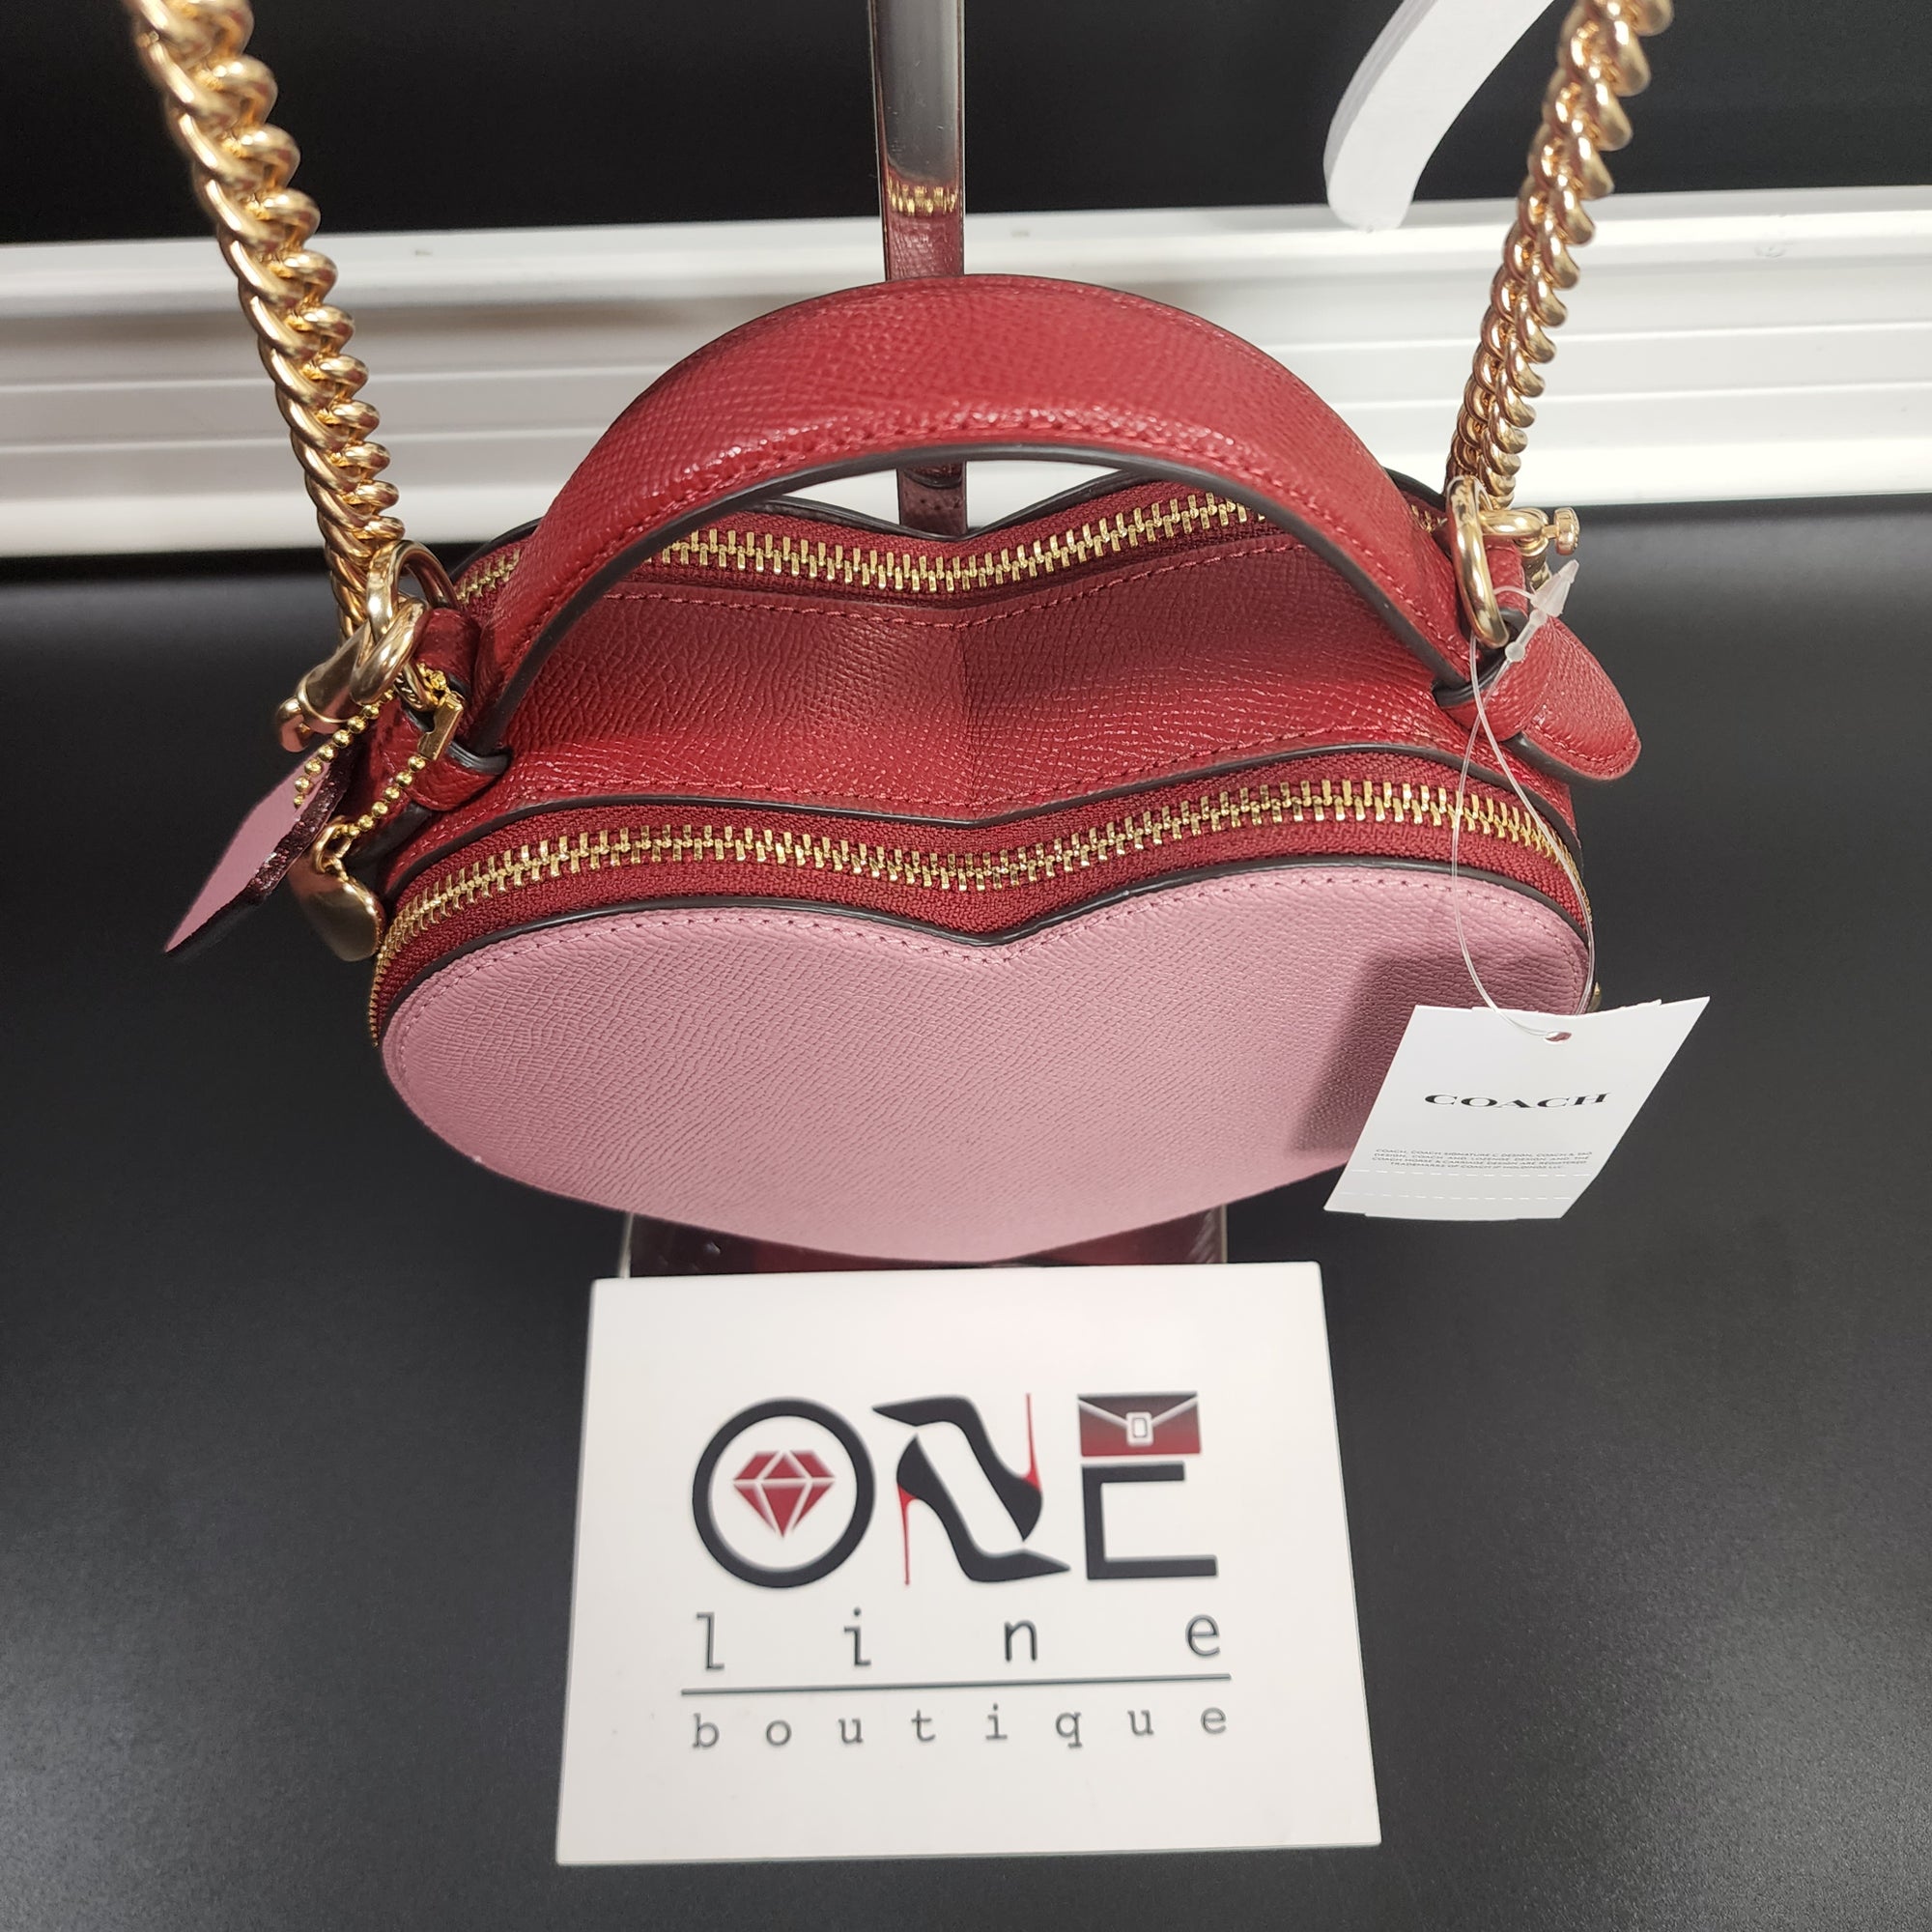 NEW COACH HEART BAG LIMITED EDITION